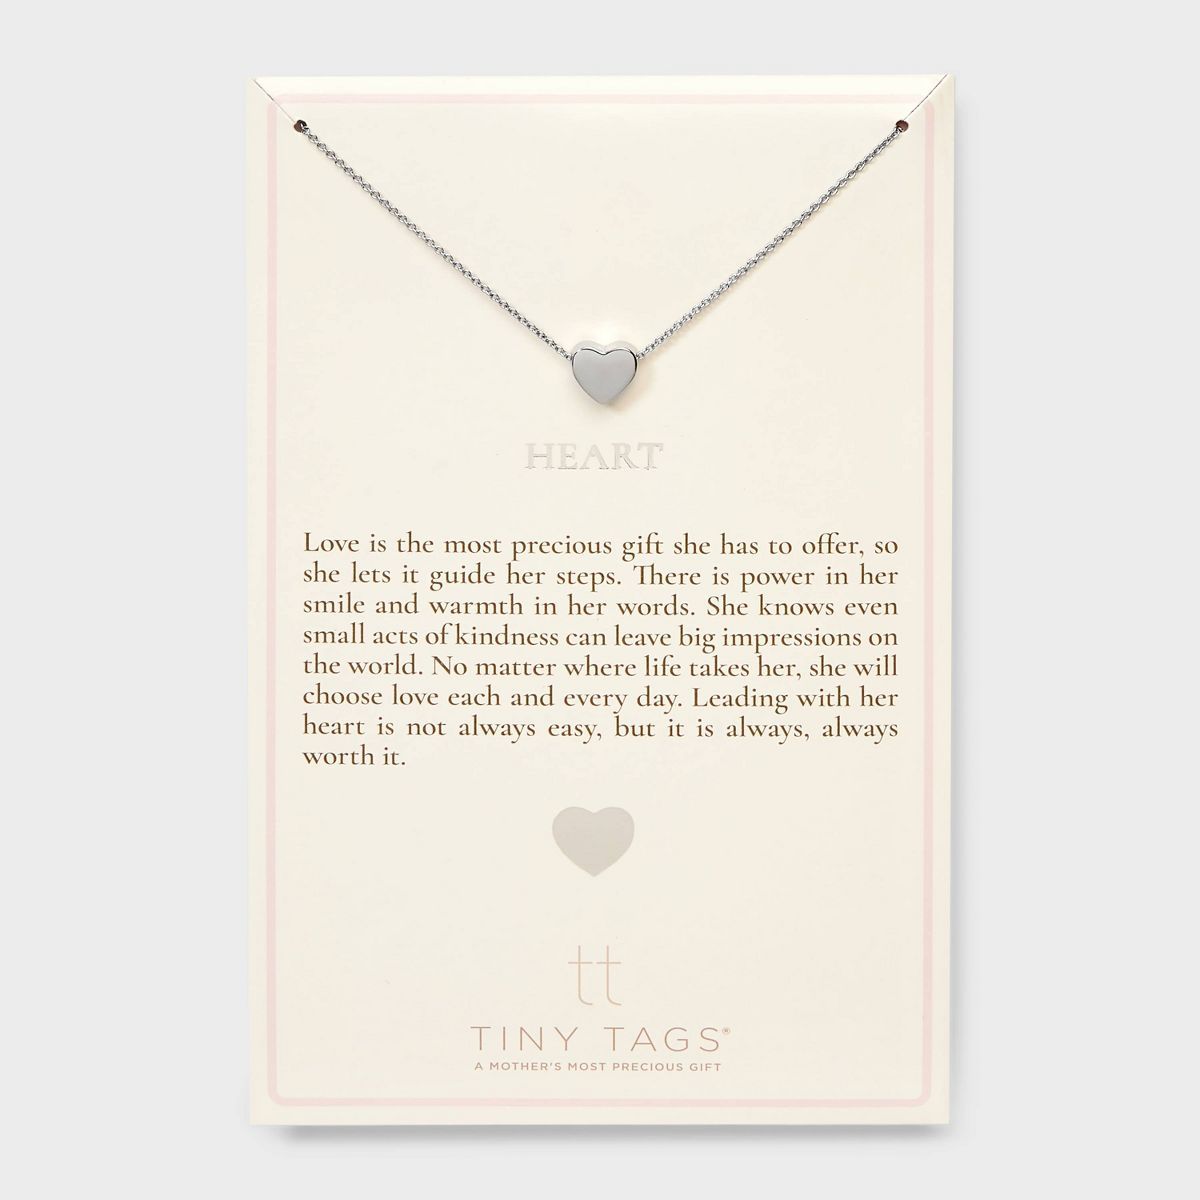 Tiny Tags Silver Plated Heart Chain Necklace - Silver | Target